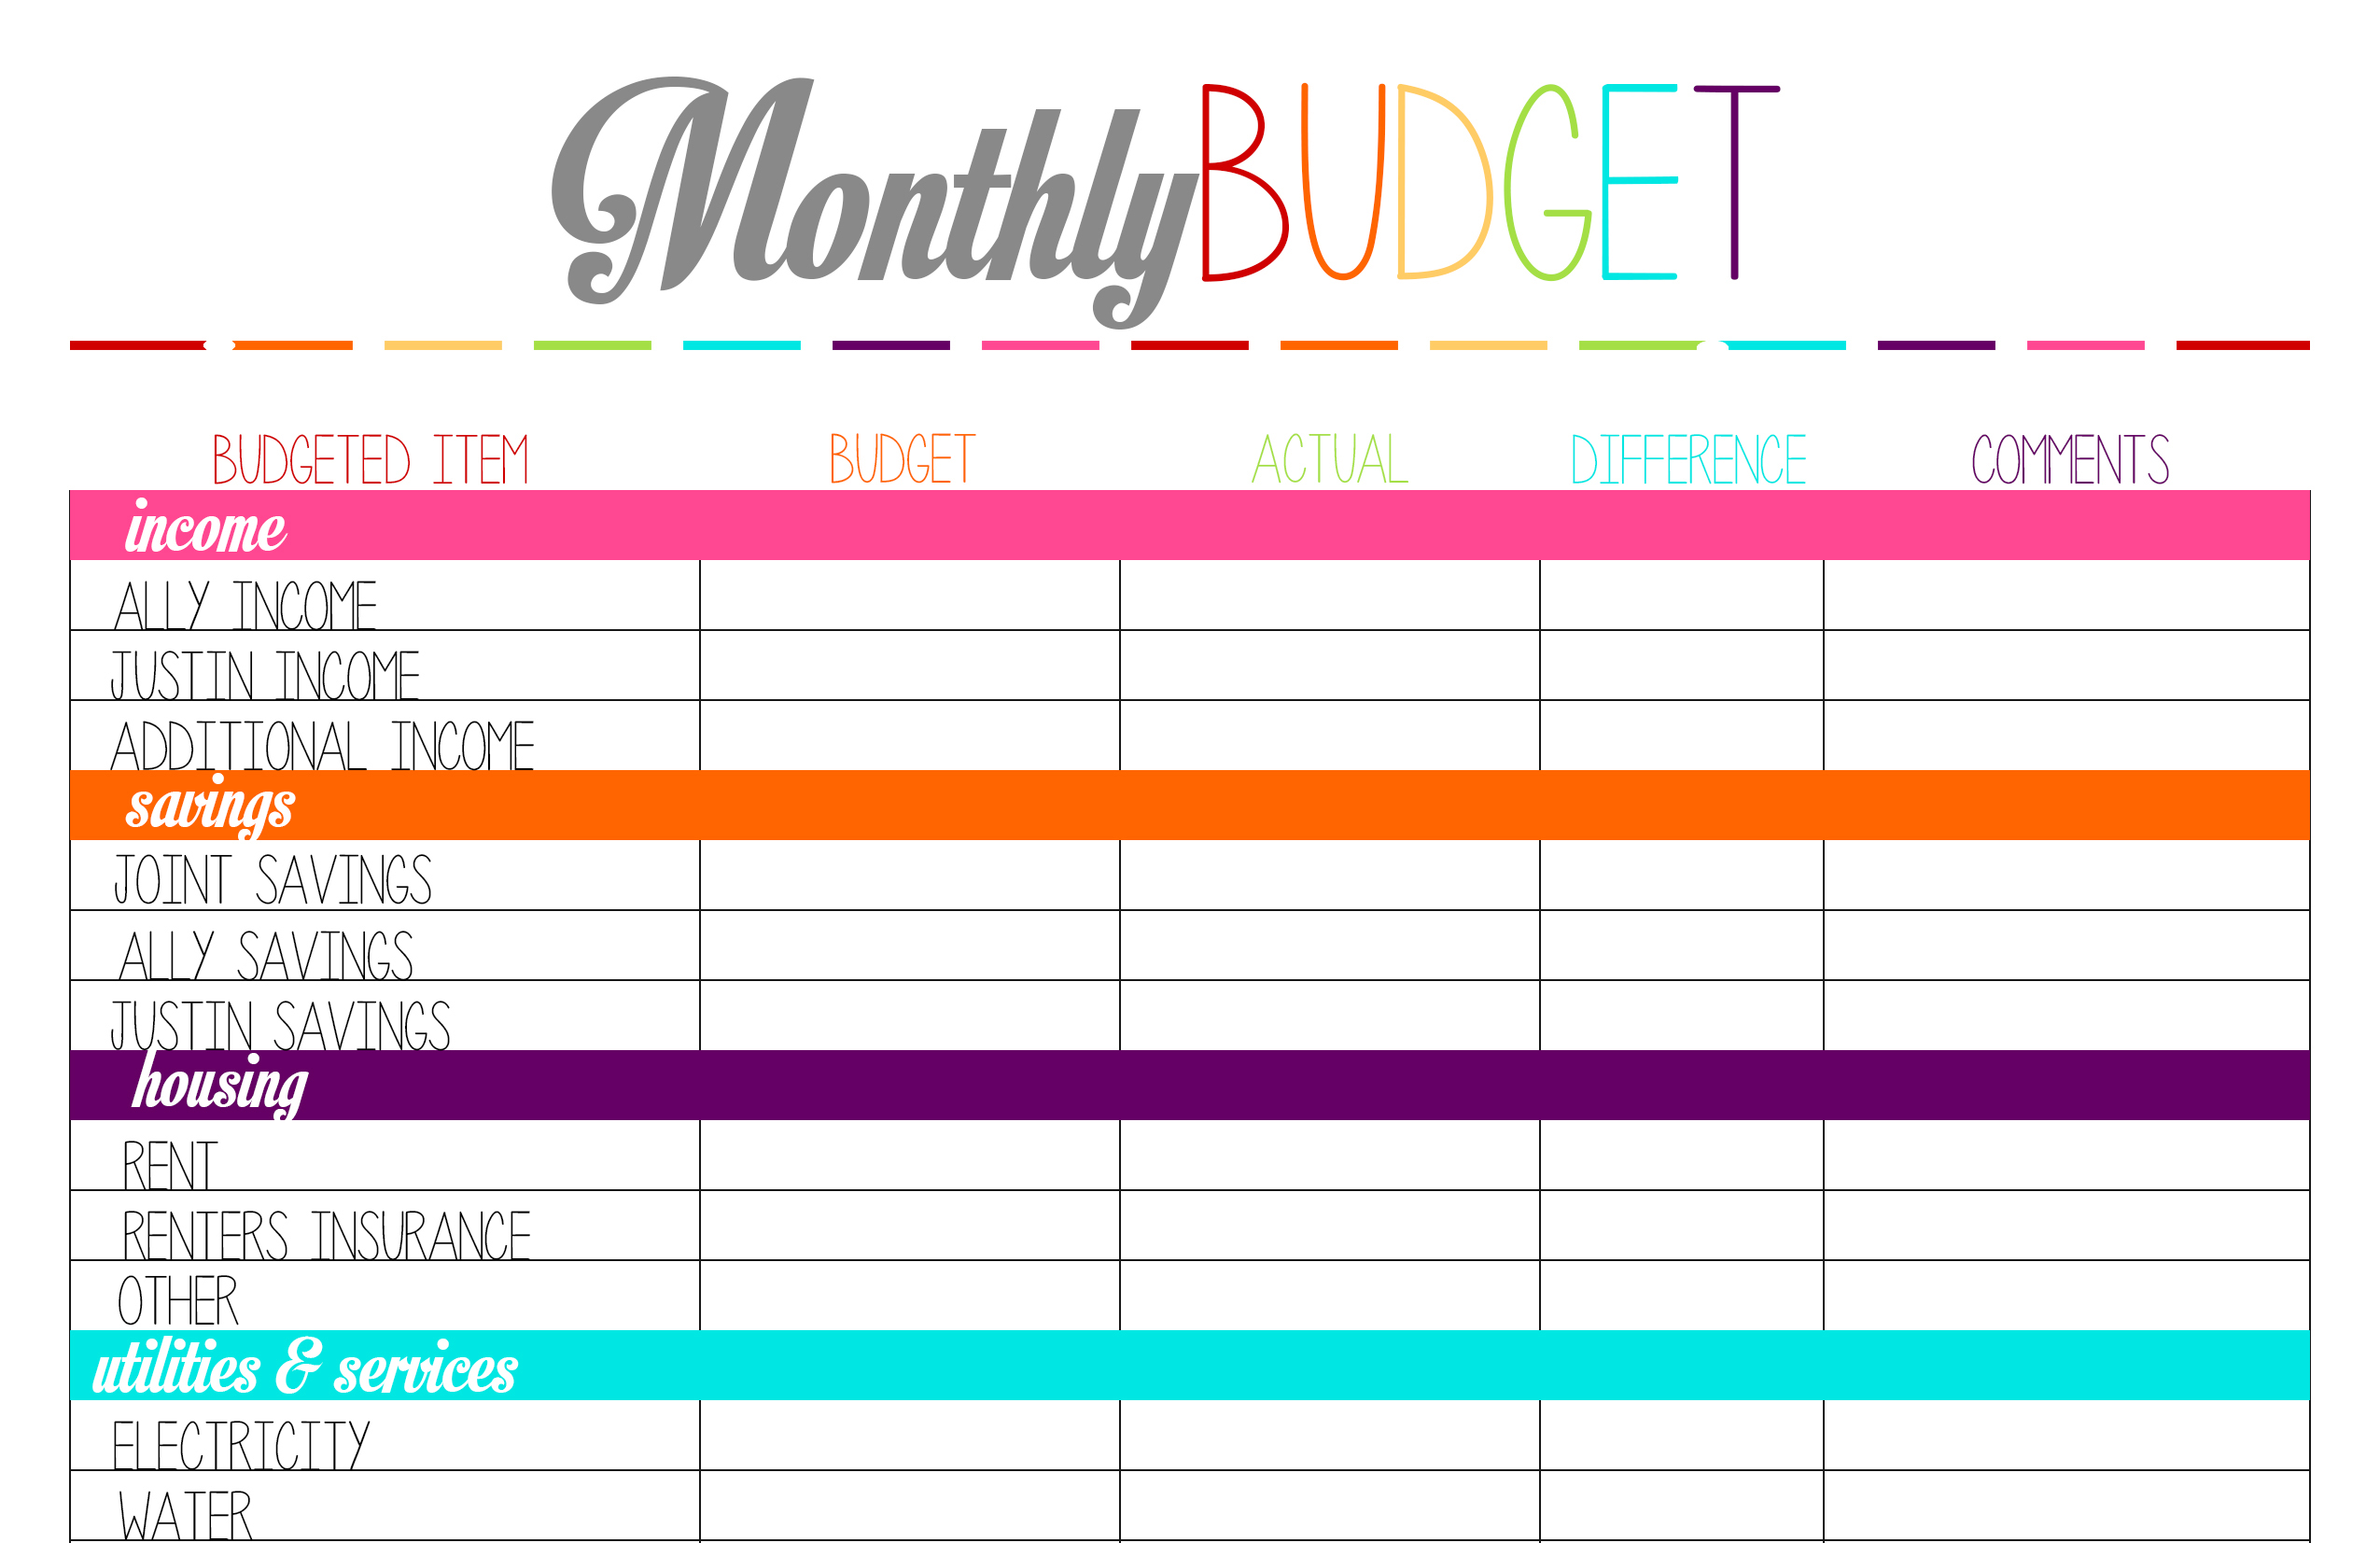 basic budgeting worksheets printable   Into.anysearch.co